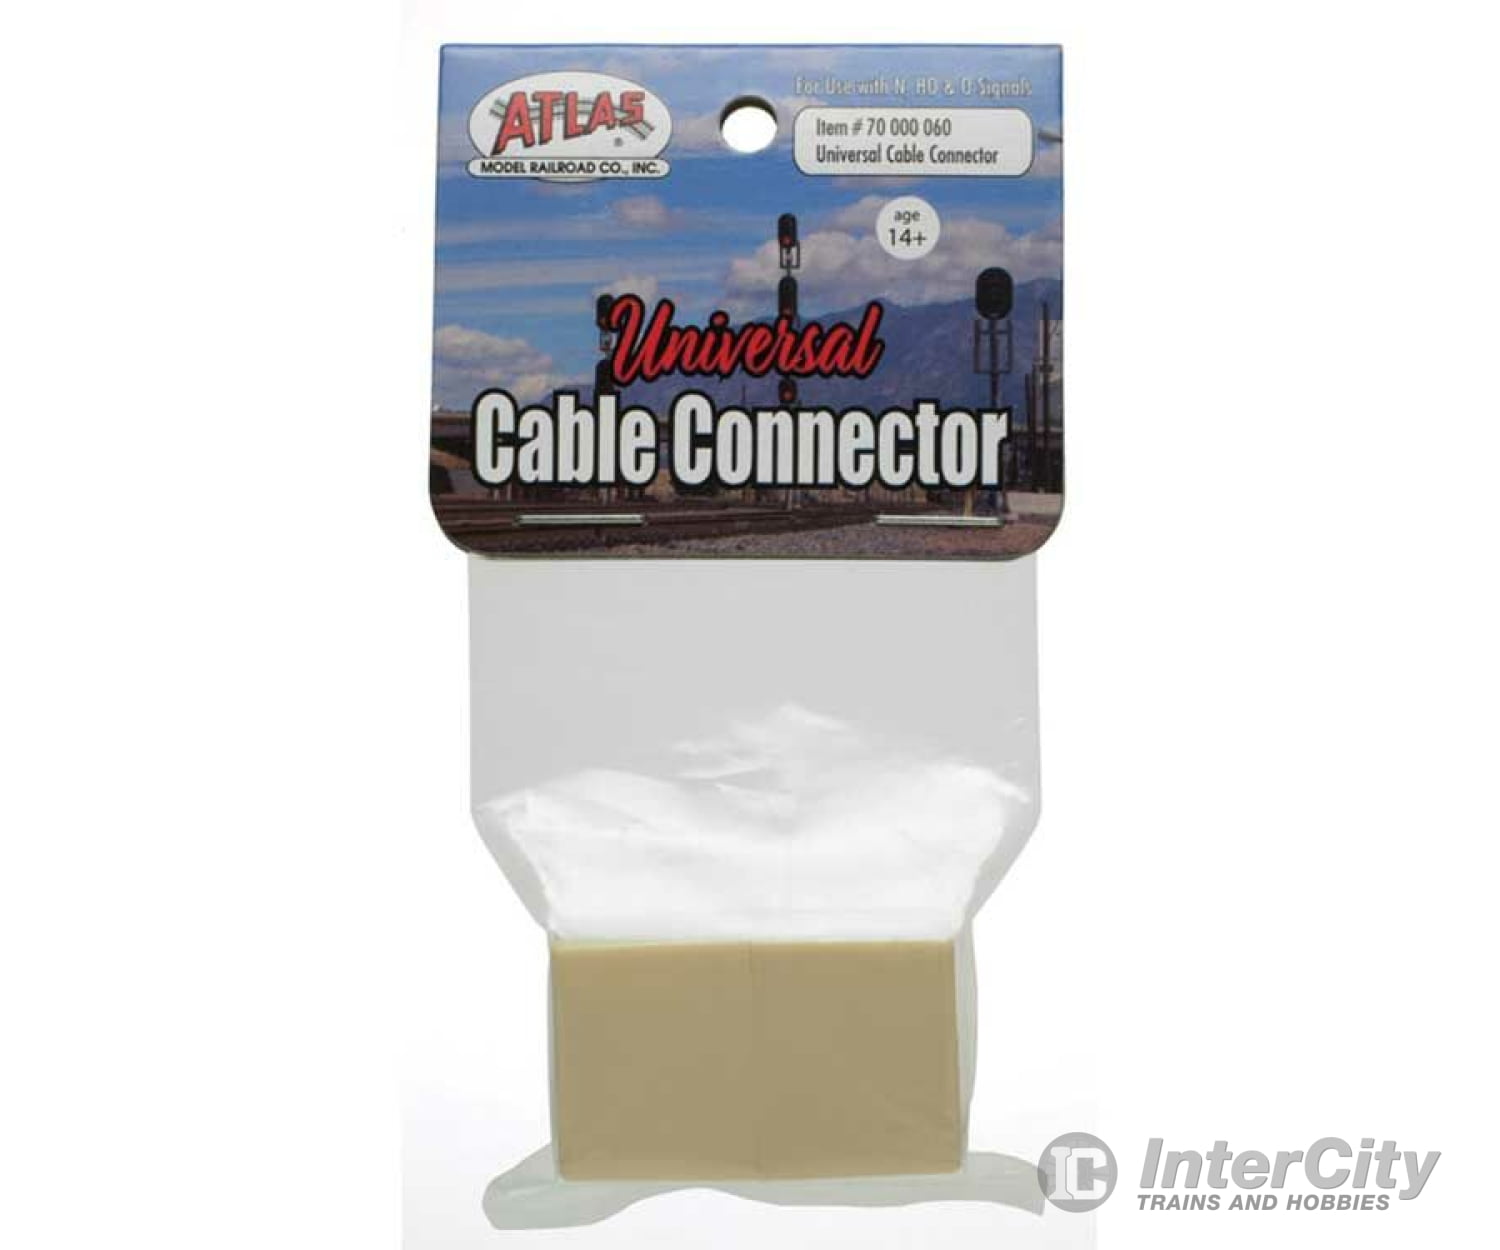 Atlas 70000060 Scb Interconnect Cable Connector - All Scales Signal System Signals & Catenary